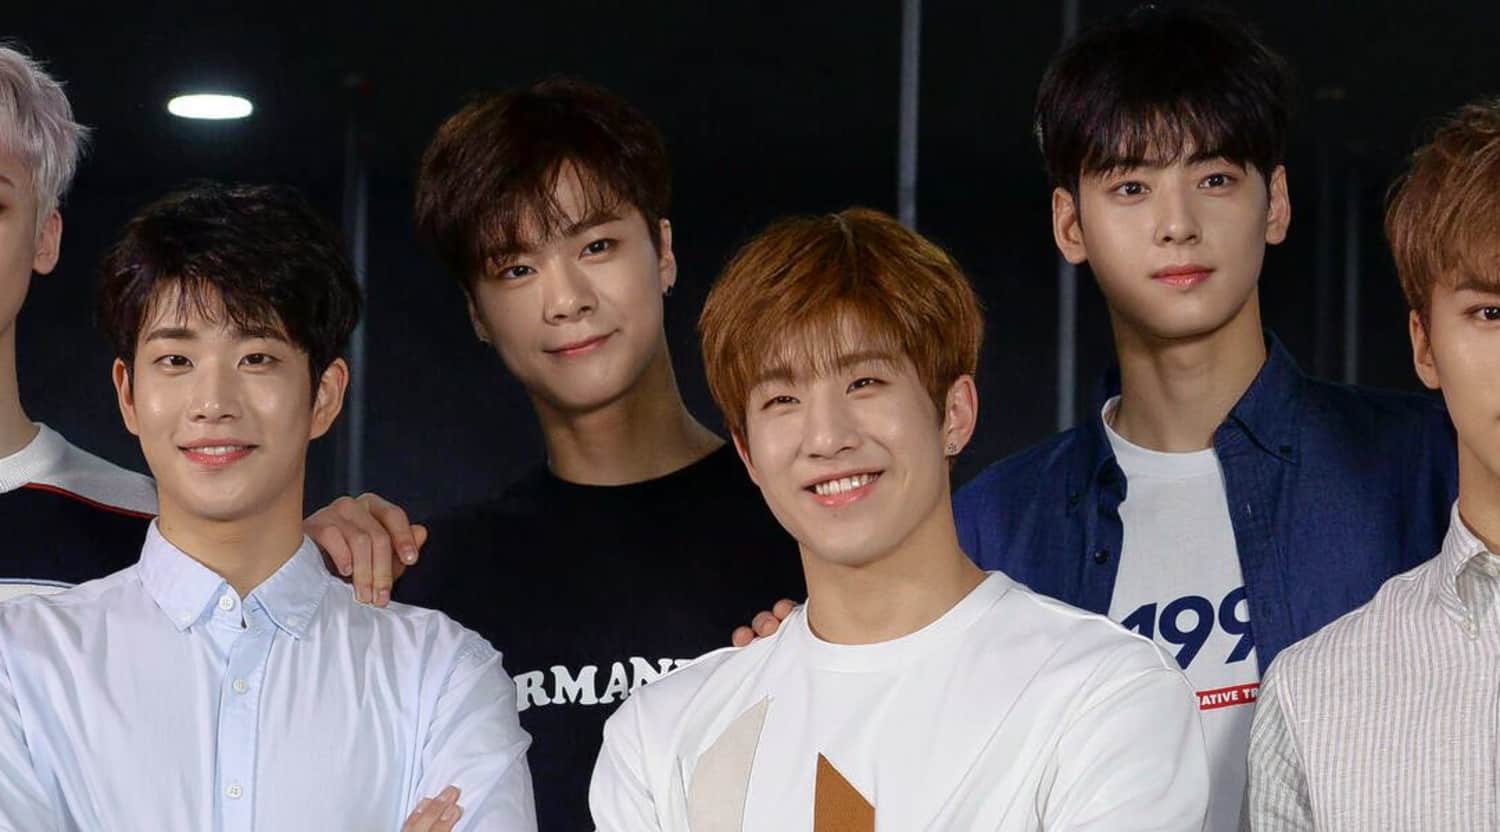 Astro (South Korean band) Tickets - Astro (South Korean band) Concert Tickets and Tour Dates ...